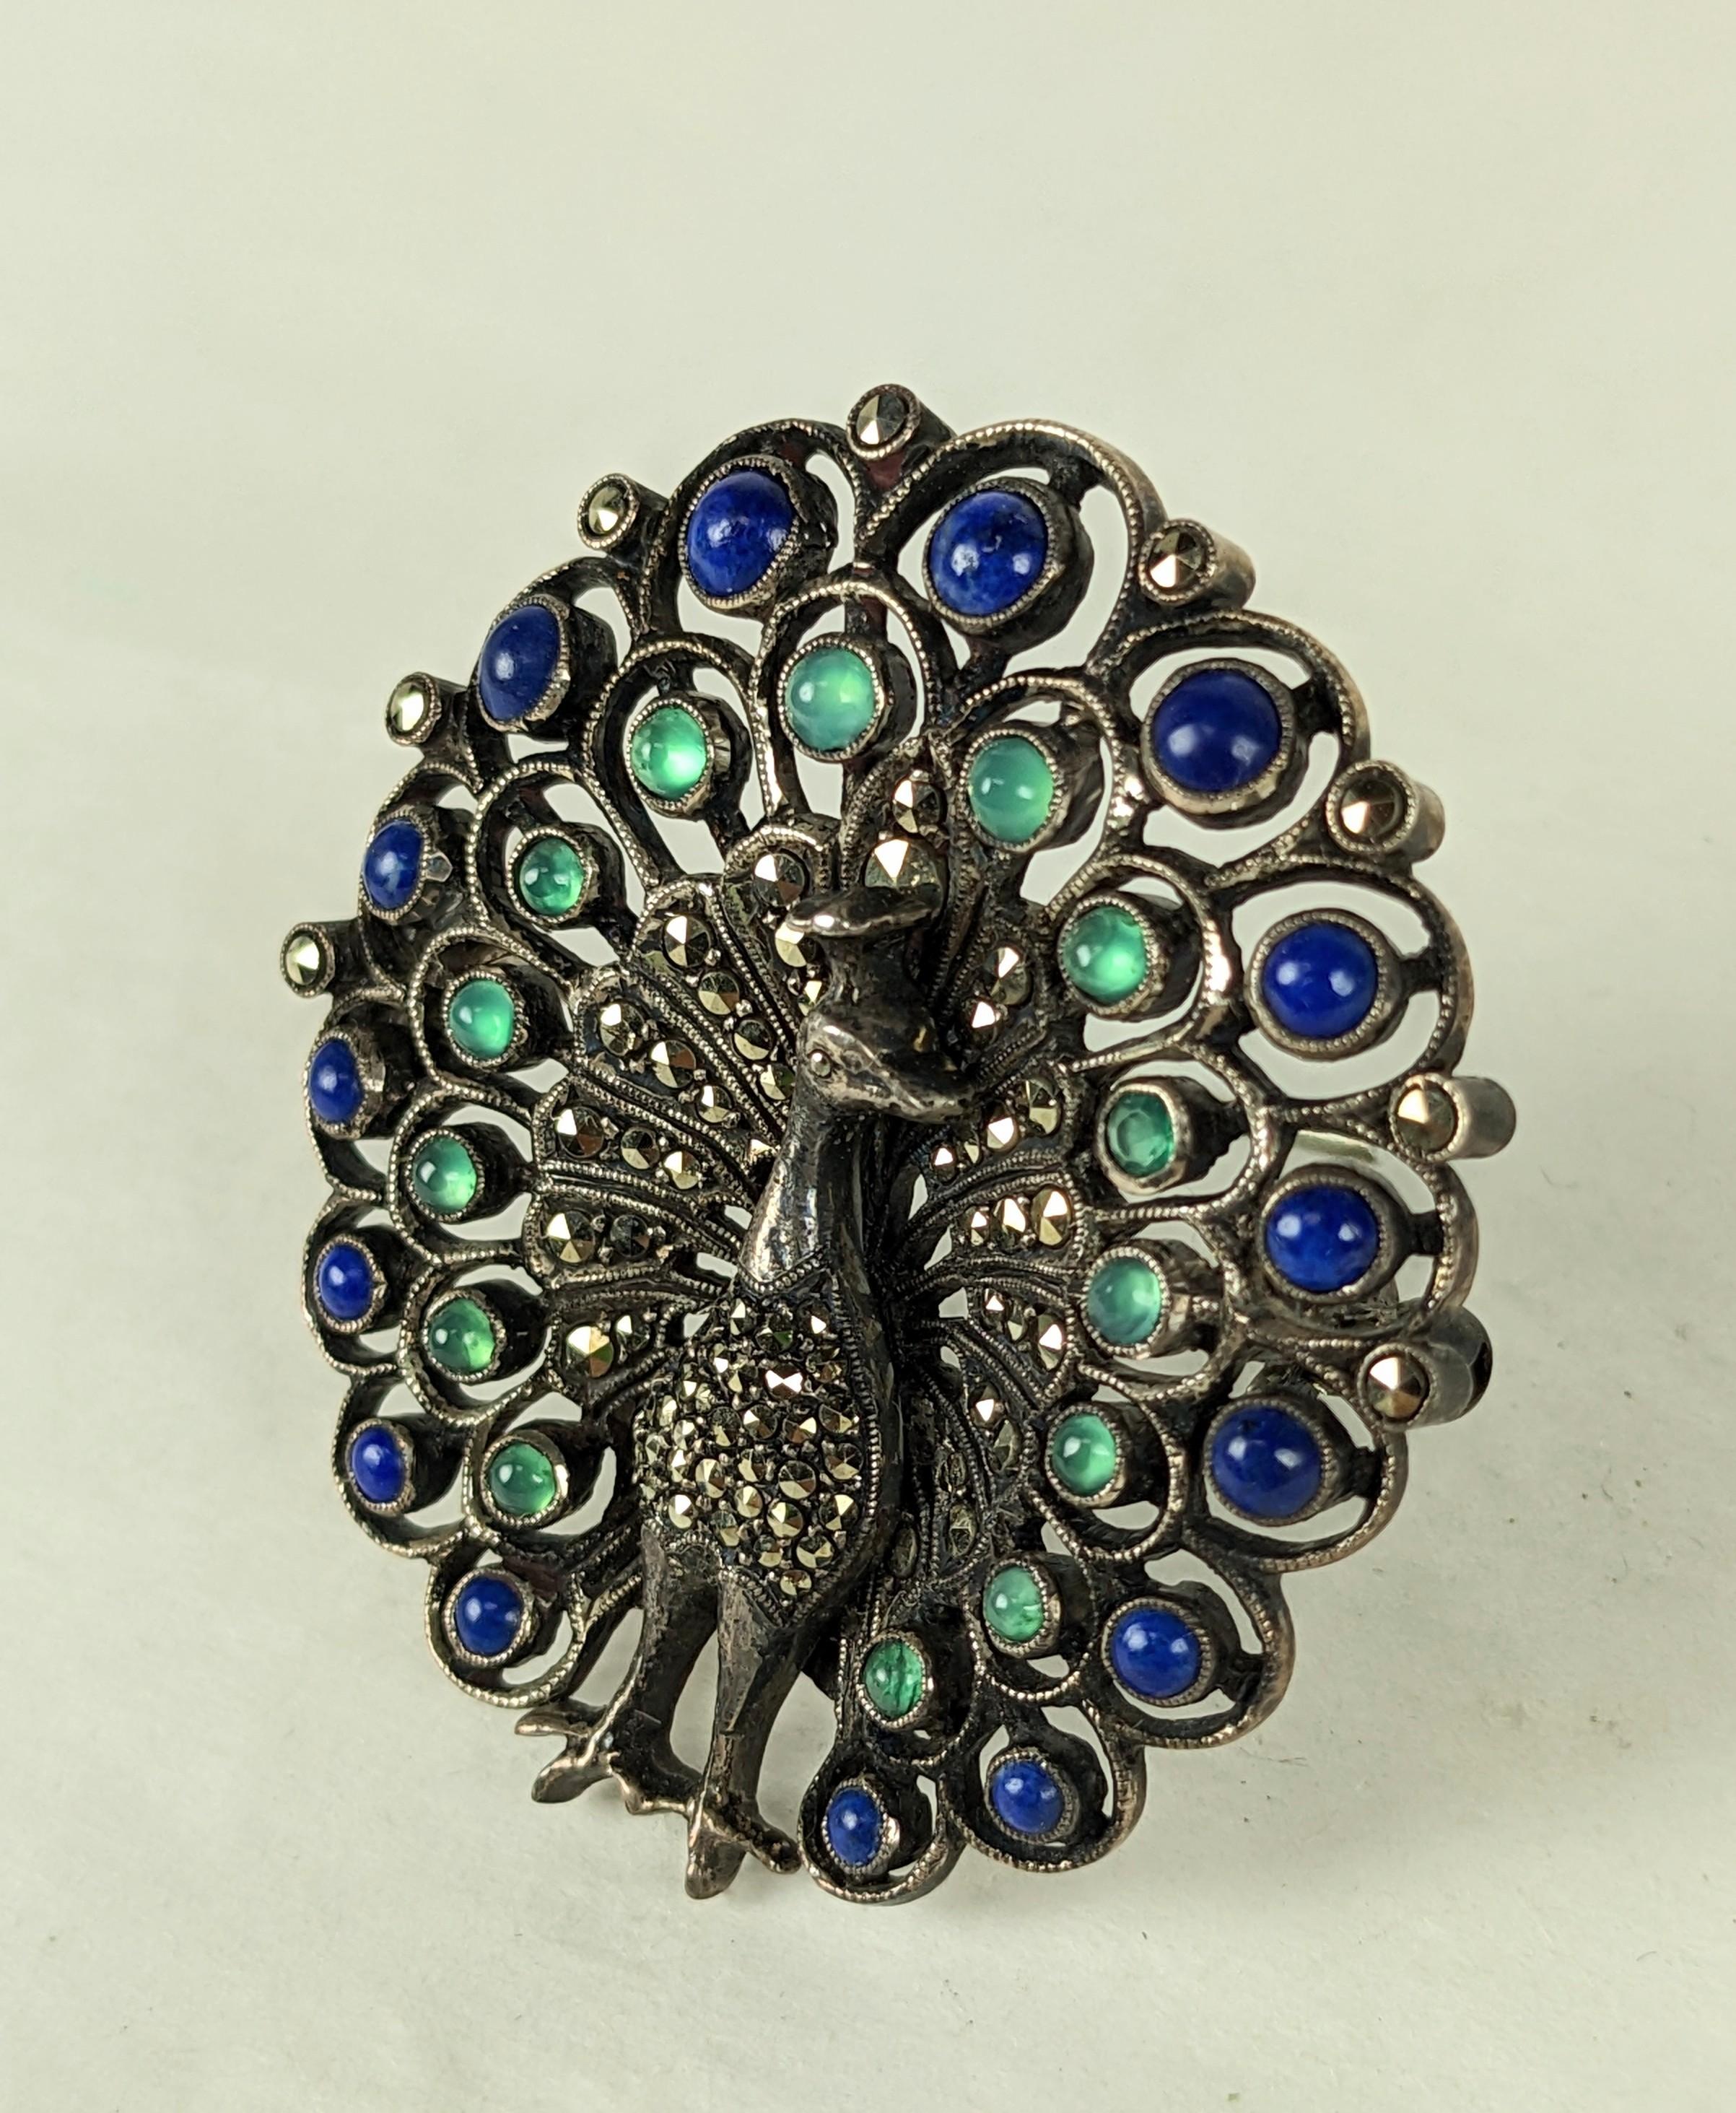 Rare Theodor Fahrner Gemstone Peacock Brooch from the Art Deco Period, 1930's Germany. Hand set with tiny marcasites with lapis lazuli and green onyx cabochons in a beautiful pierced setting. Signed with TF hallmark, 935 Sterling. 1930's Germany.